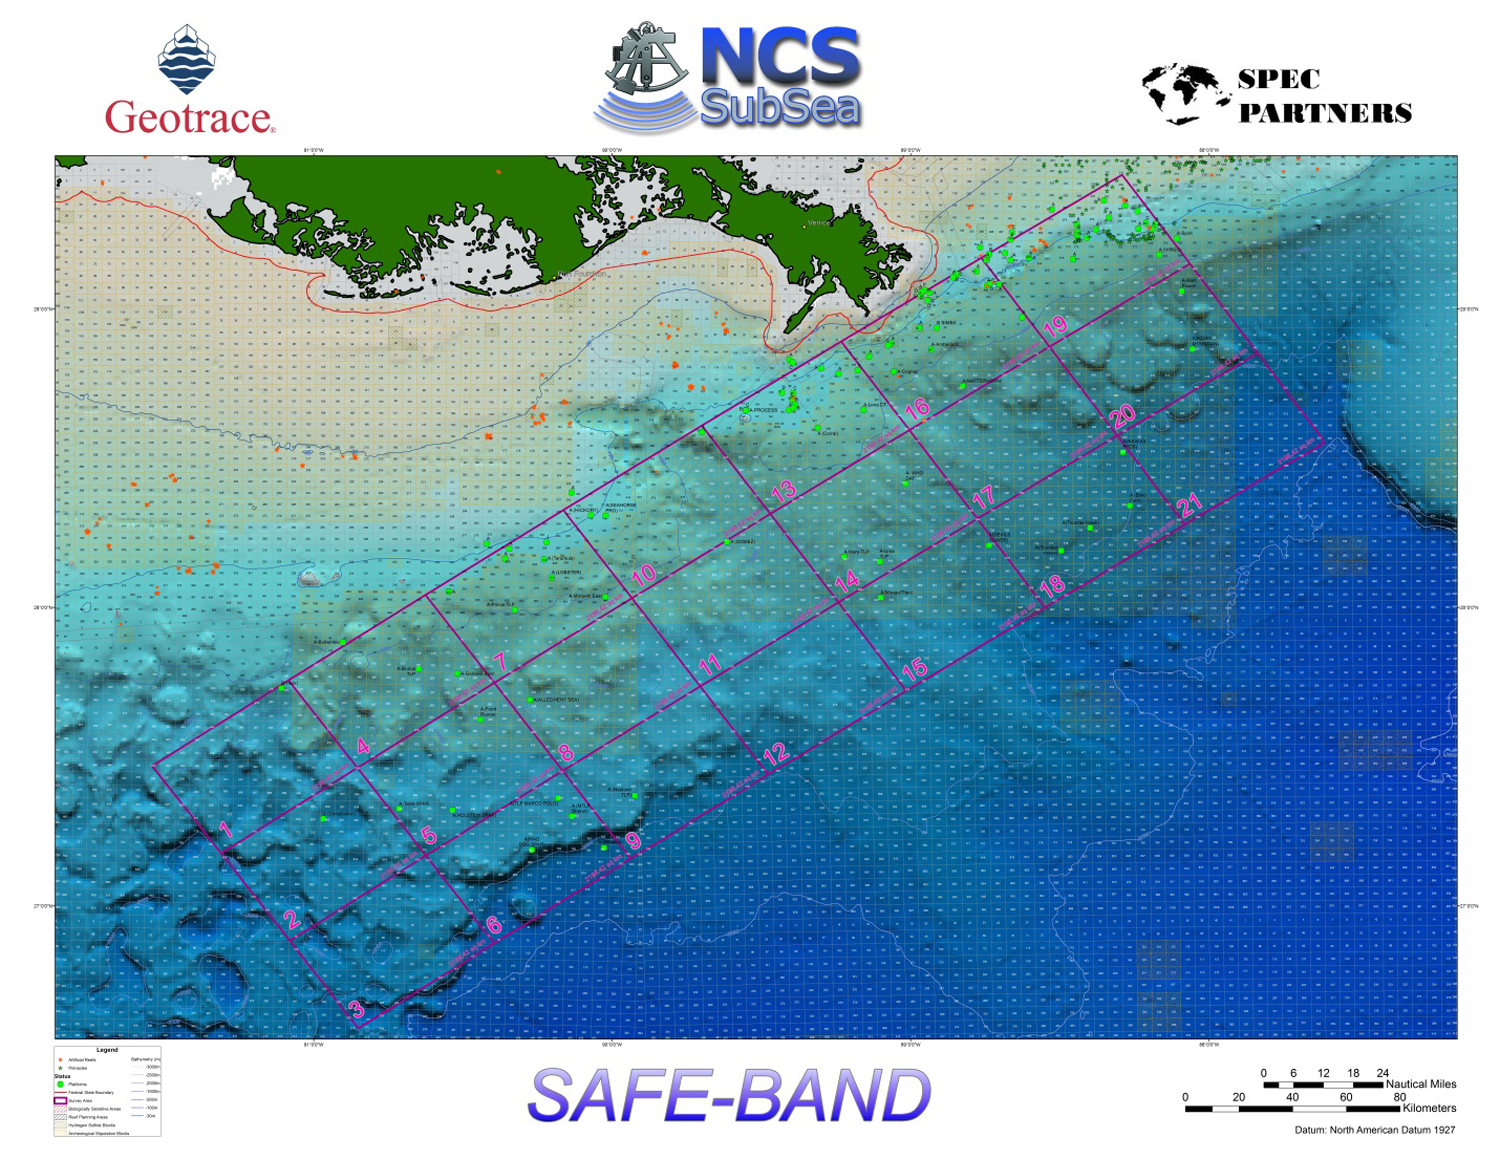 The SAFE-BAND multi-phase project area along the Gulf of Mexico continental slope.